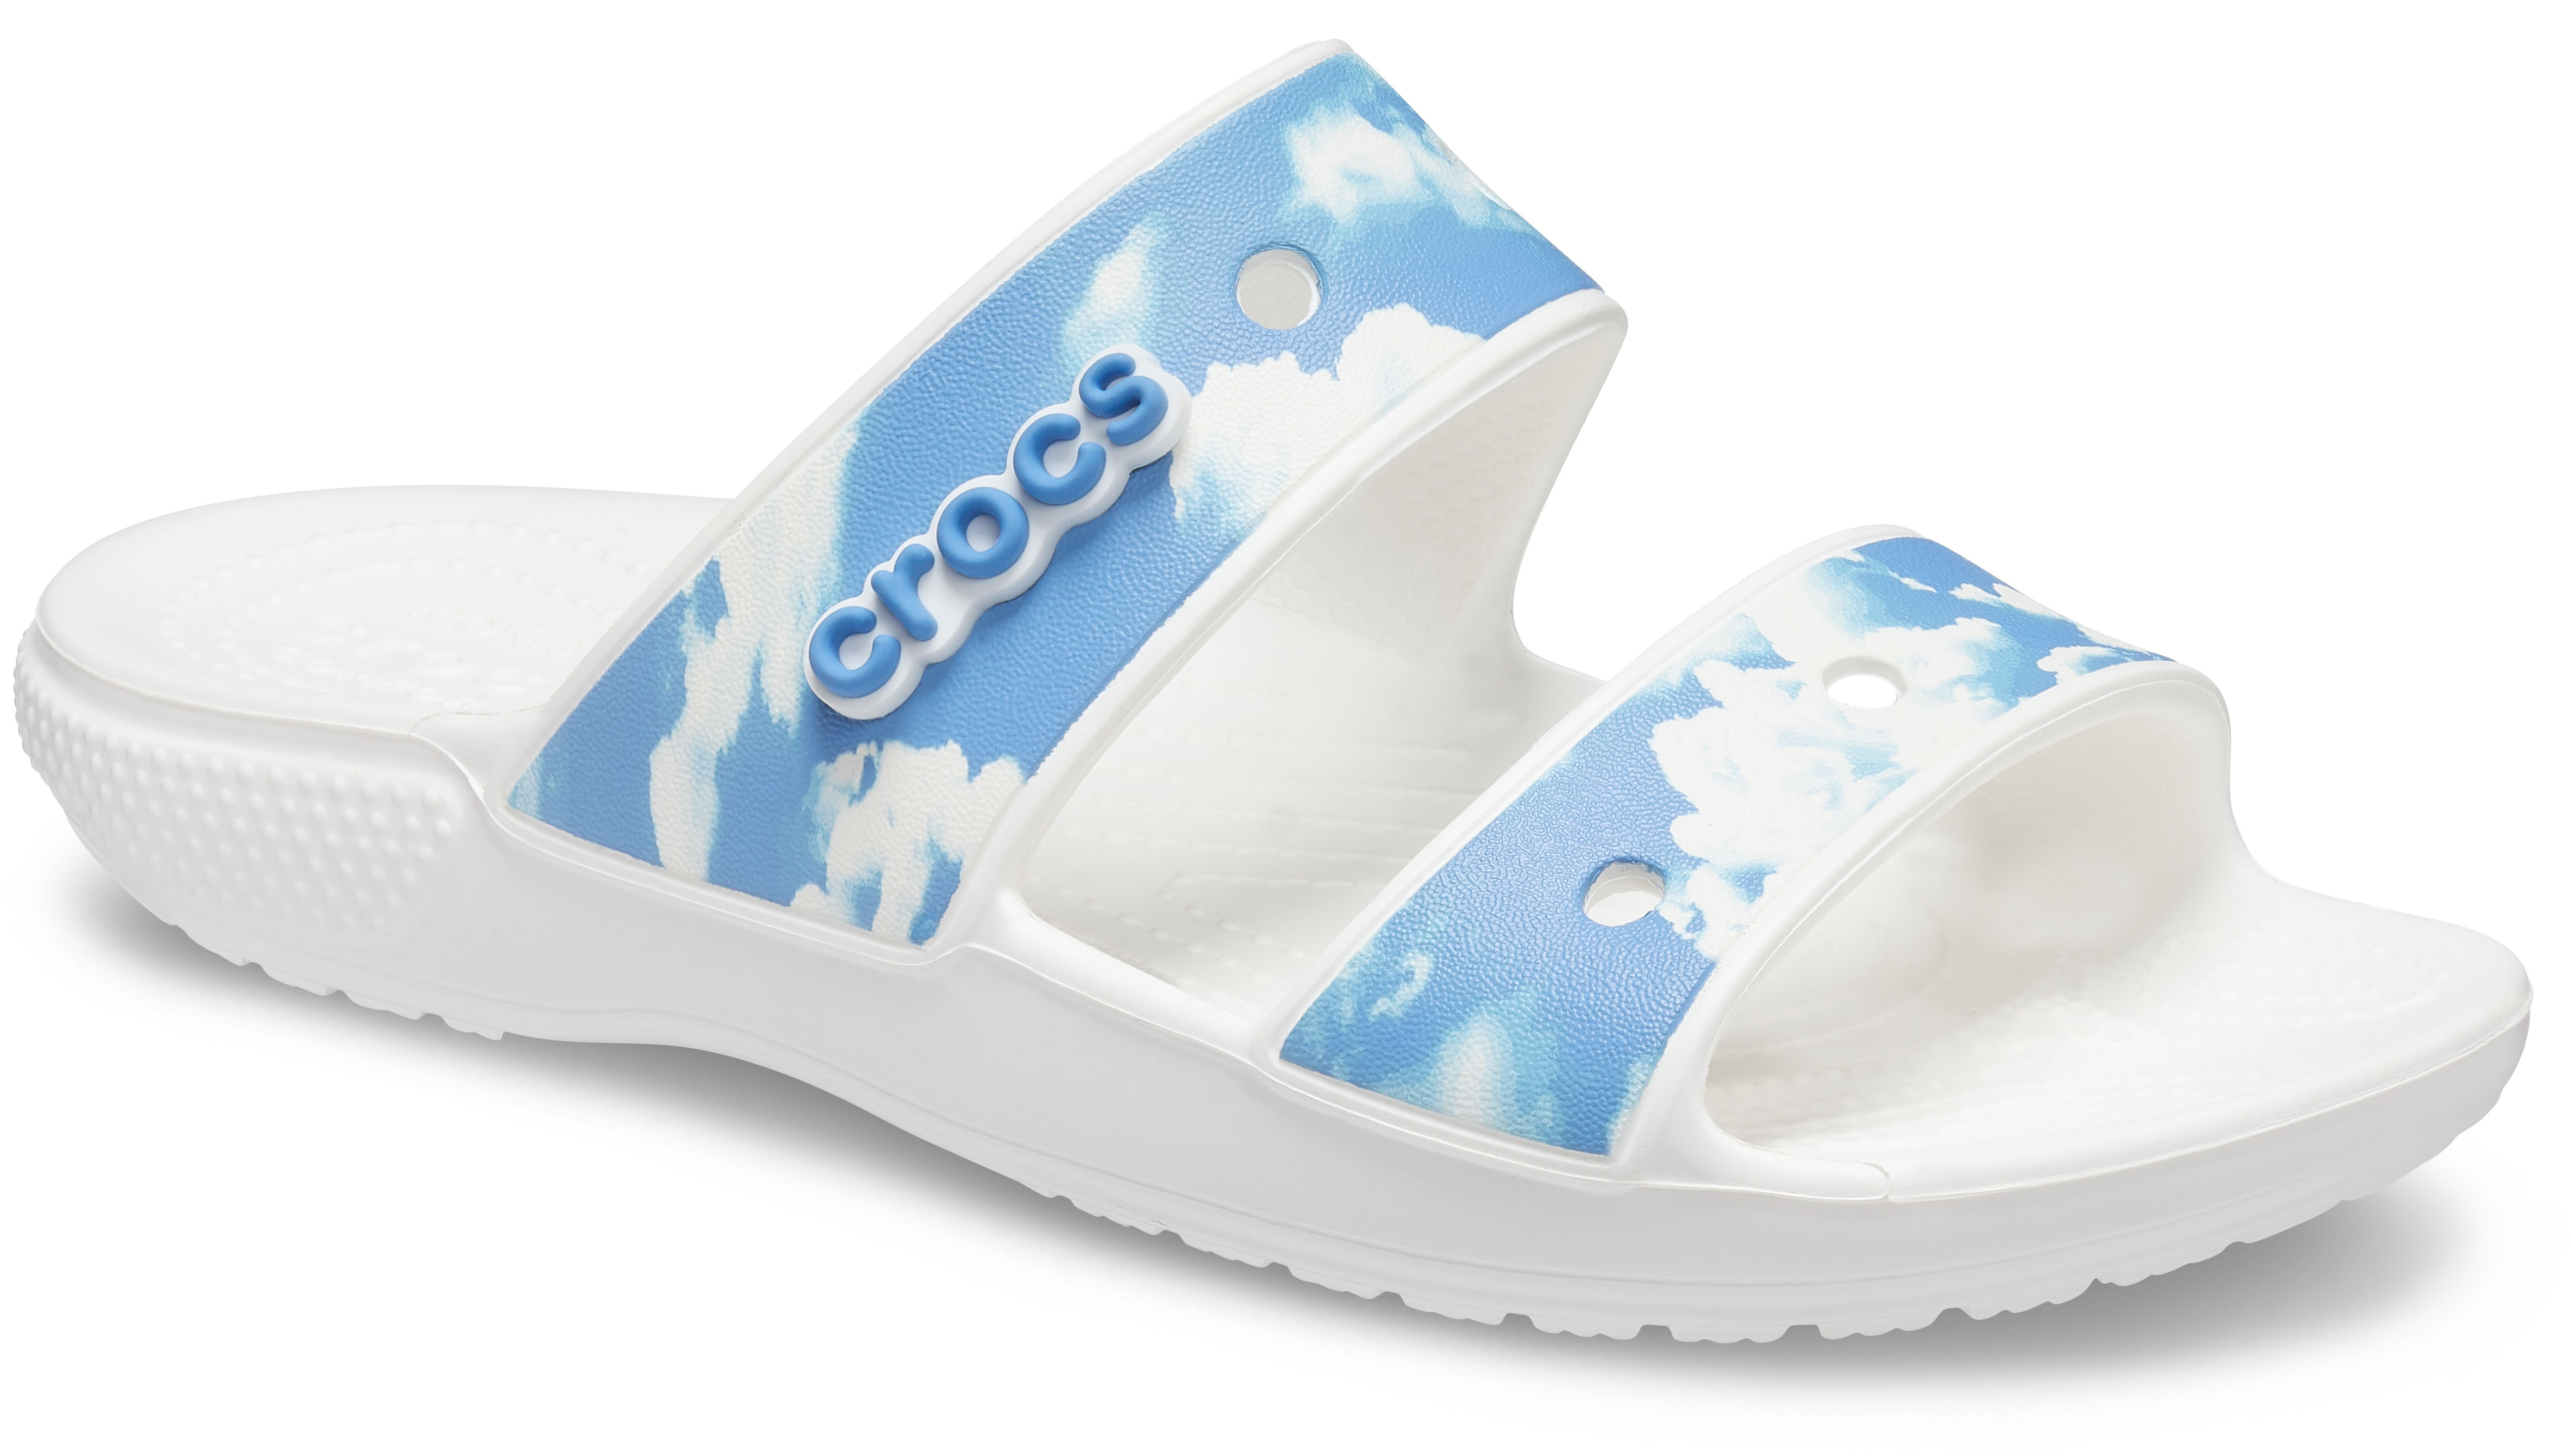 Classic Crocs Out Of This World Sandal White Croslite